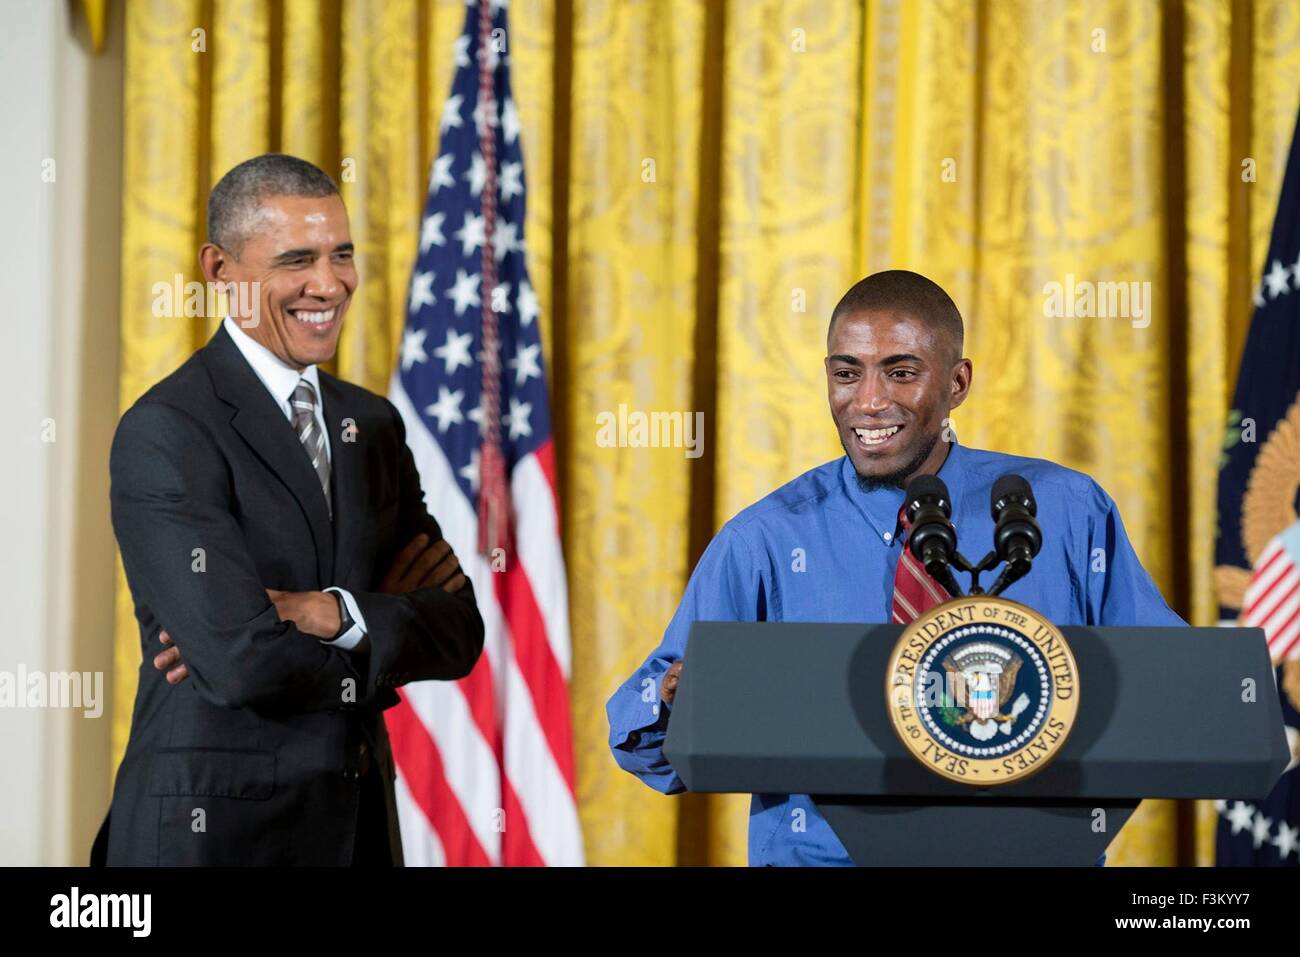 Washington DC, USA. 7th October, 2015. U.S. President Barack Obama smiles as Terrence Wise of Fight for $15 introduces him at the White House Summit on Worker Voice in the East Room October 7, 2015 in Washington, DC. Terrence Wise is a second-generation minimum wage fast-food worker. Stock Photo